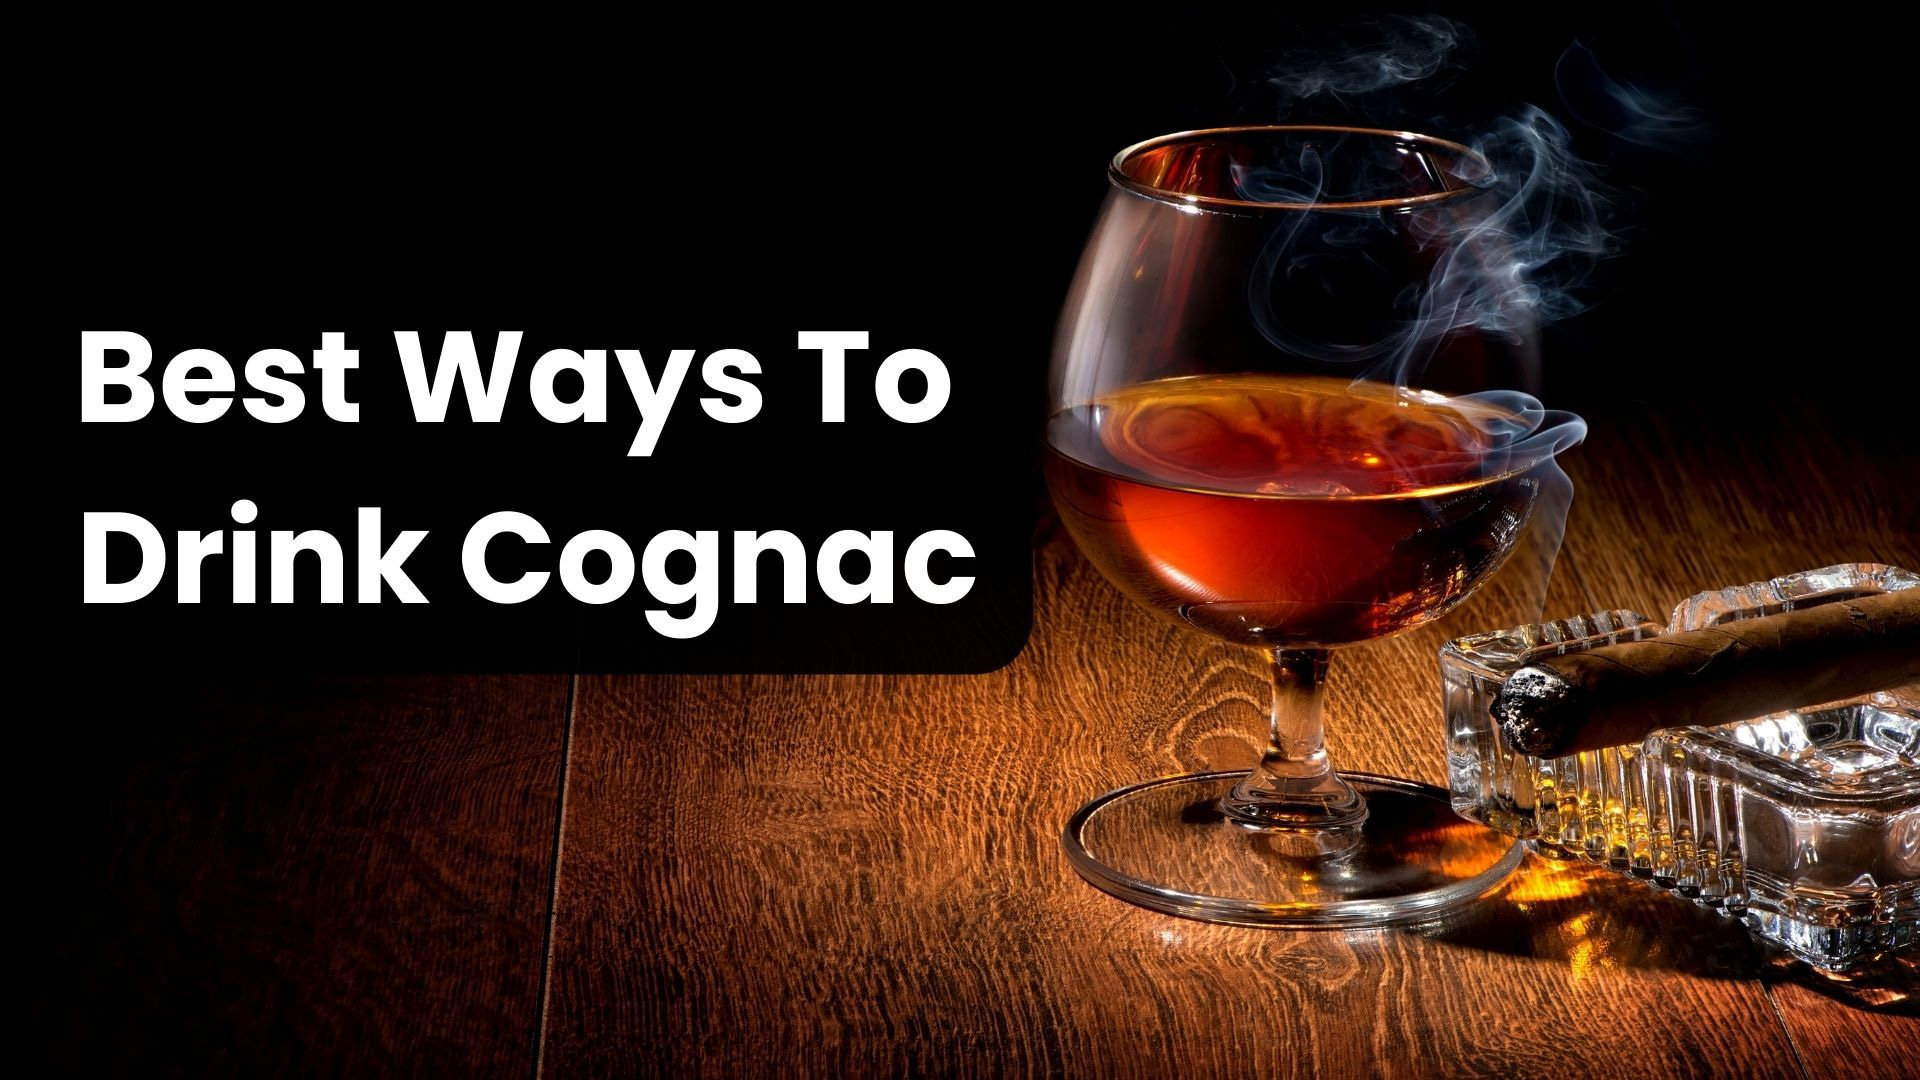 What Are The Best Ways To Drink Cognac